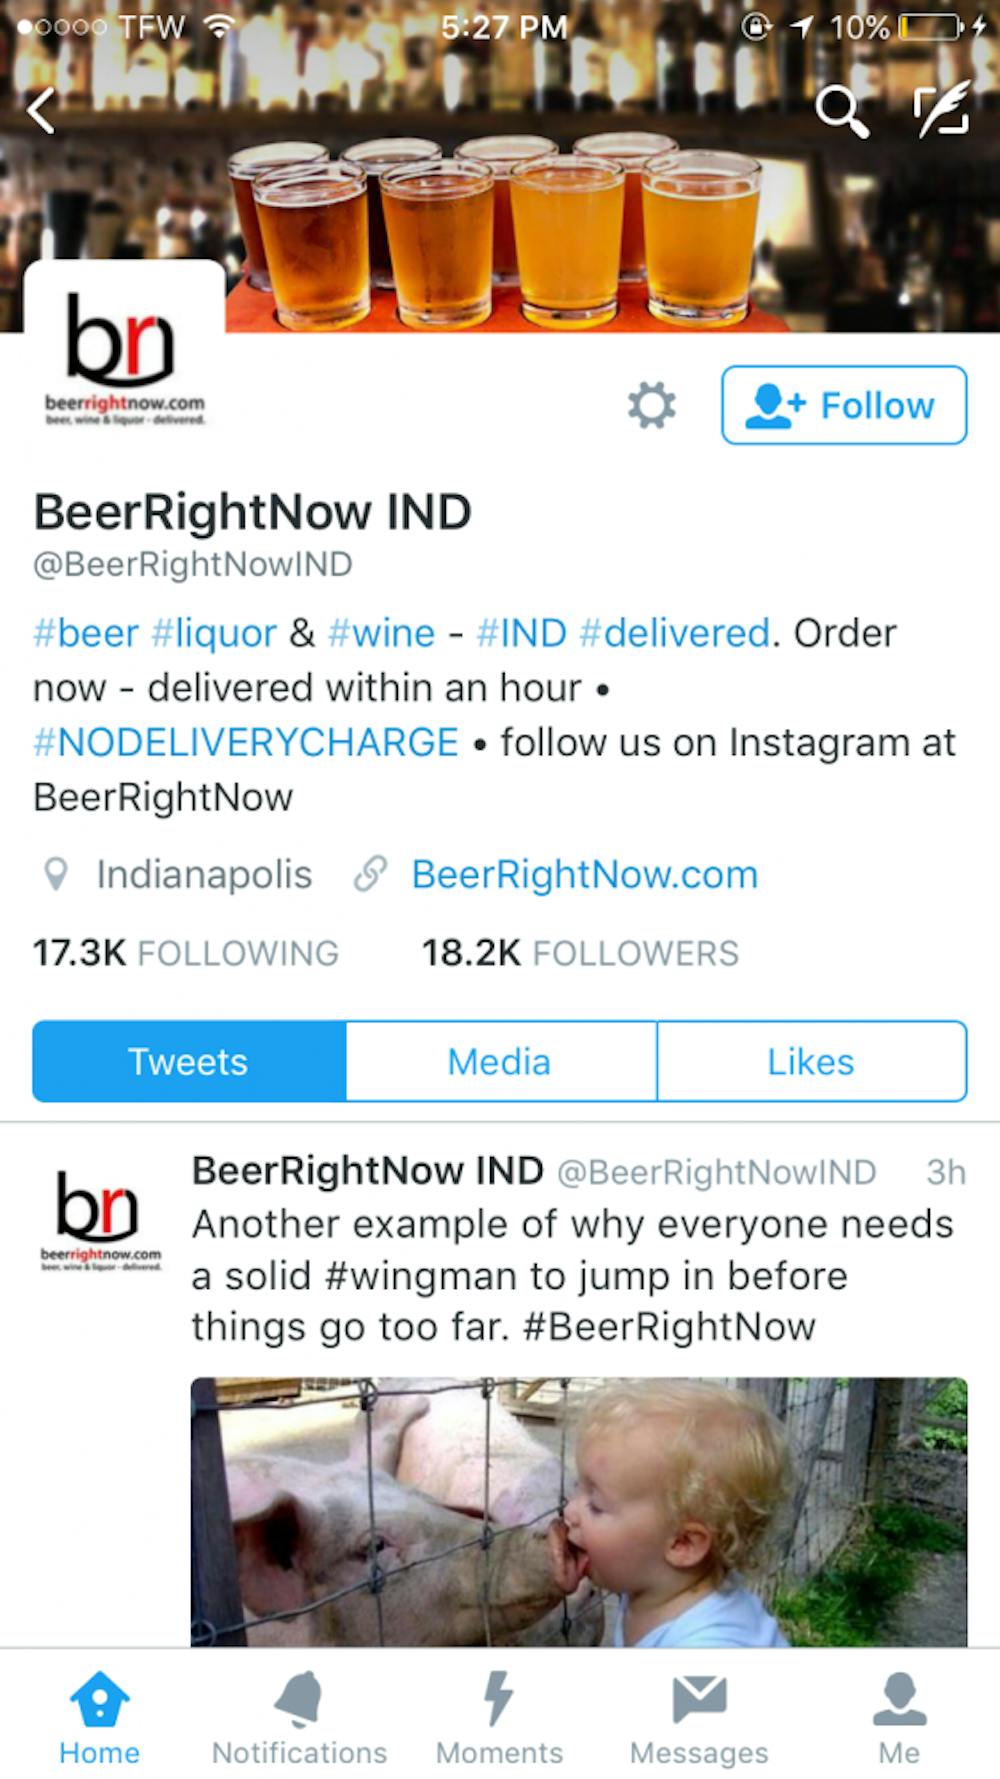 <p>Beer Right Now started in 2008 in Philadelphia and has expanded into bigger cities like New York City and Los Angeles. The company is an online delivery service that brings alcohol to customers' doors.<em> PHOTO COURTESY OF BEER RIGHT NOW TWITTER</em></p>